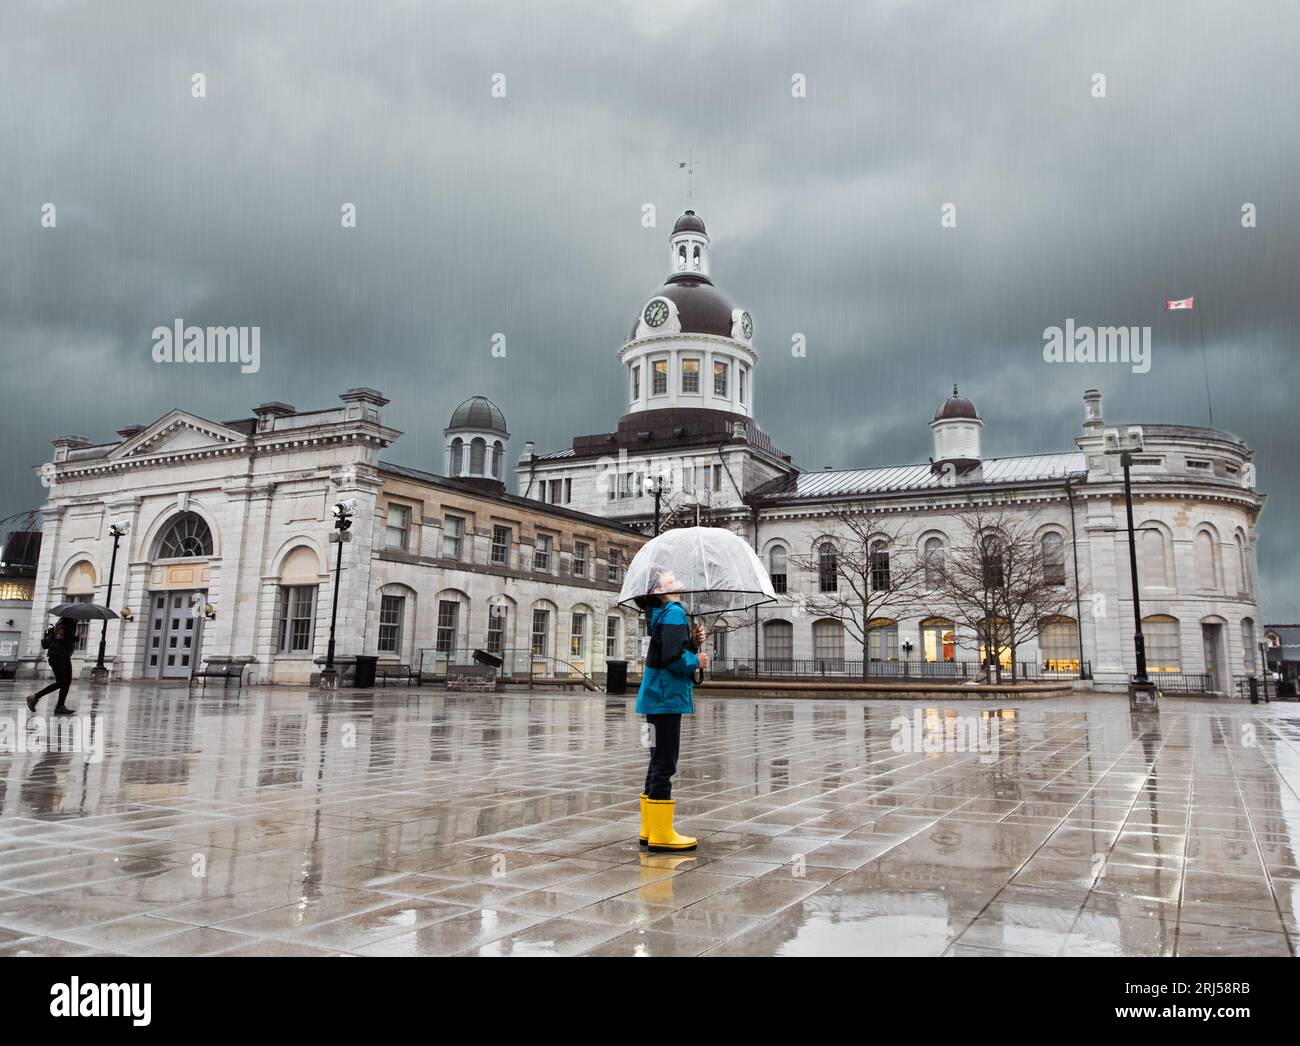 Young boy looking up at stormy sky through a clear umbrella in a city. Stock Photo